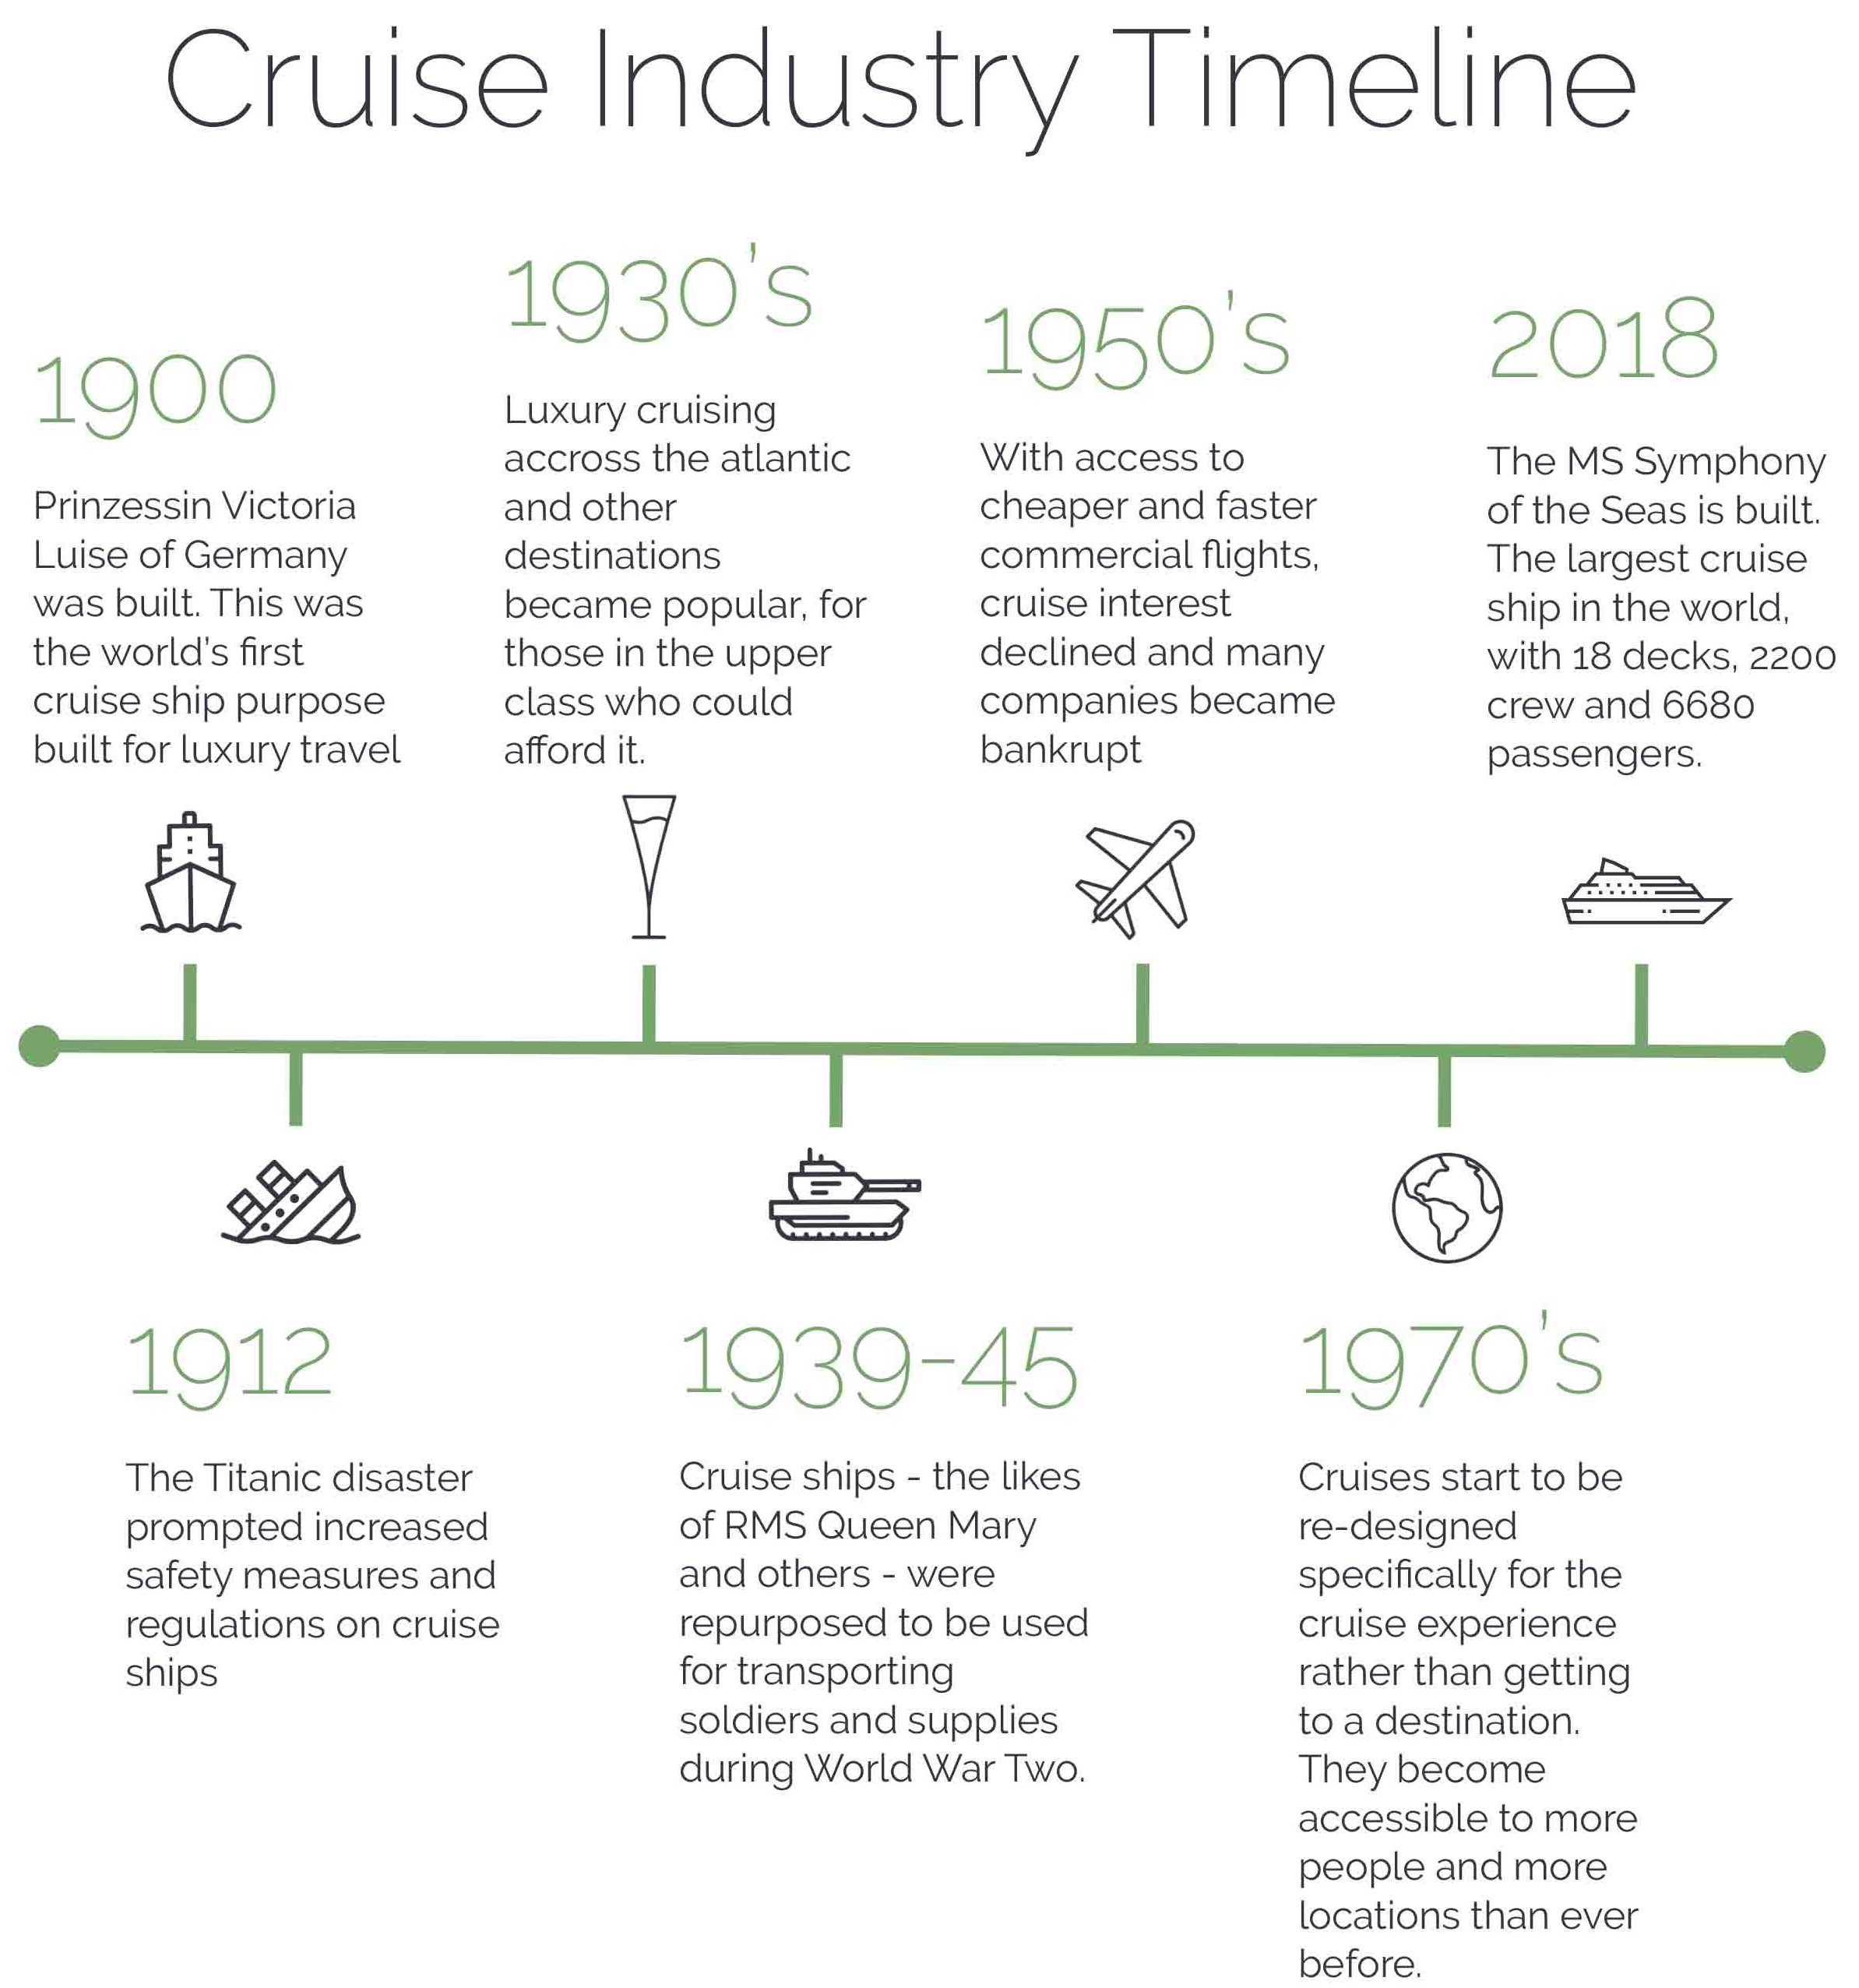 Cruise industry Timeline